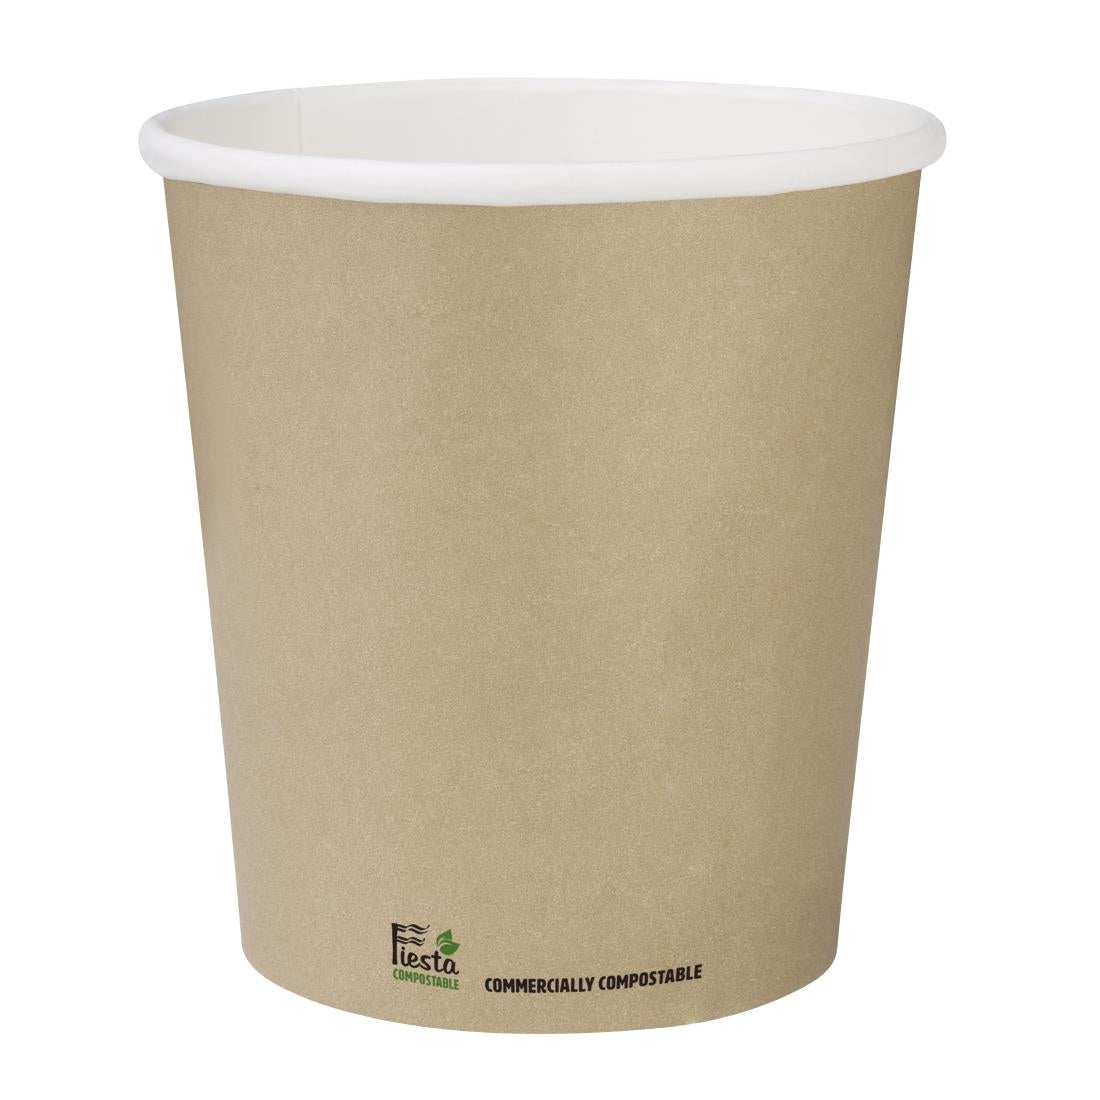 CU980 Fiesta Compostable Coffee Cups Single Wall 8oz (Pack of 1000)